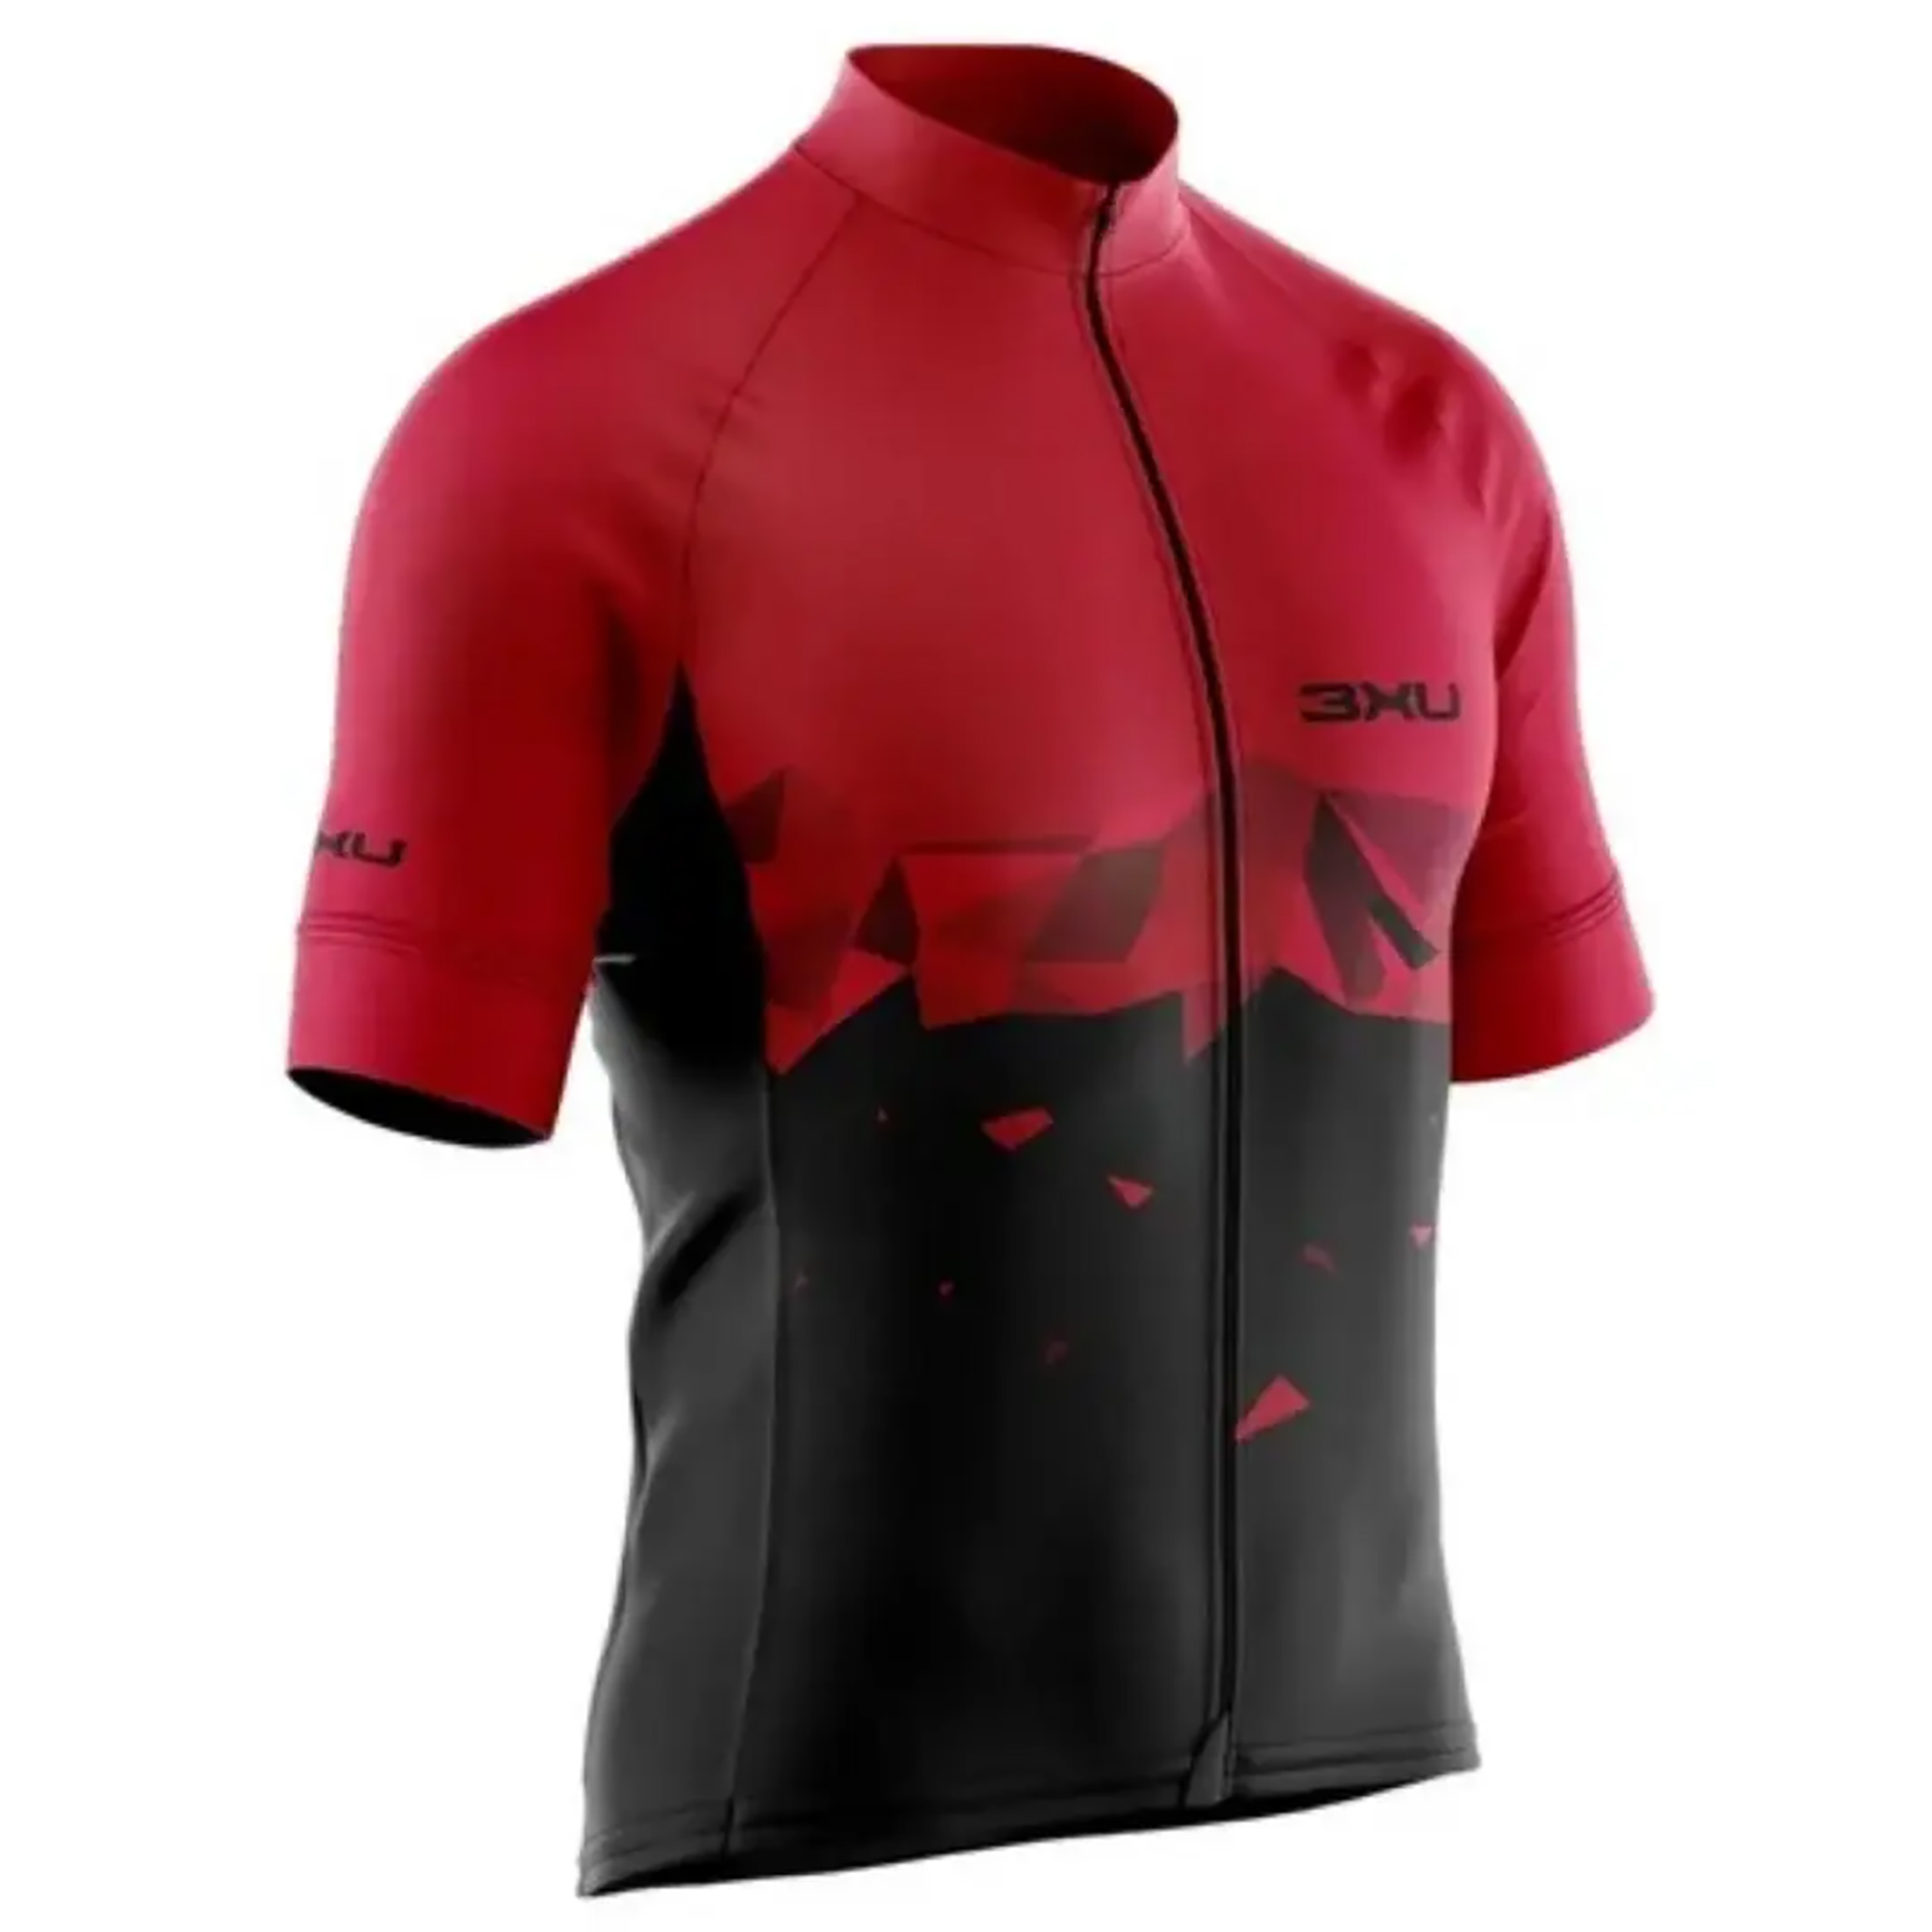 Camisa Ciclismo Masculina Inception - Refactor